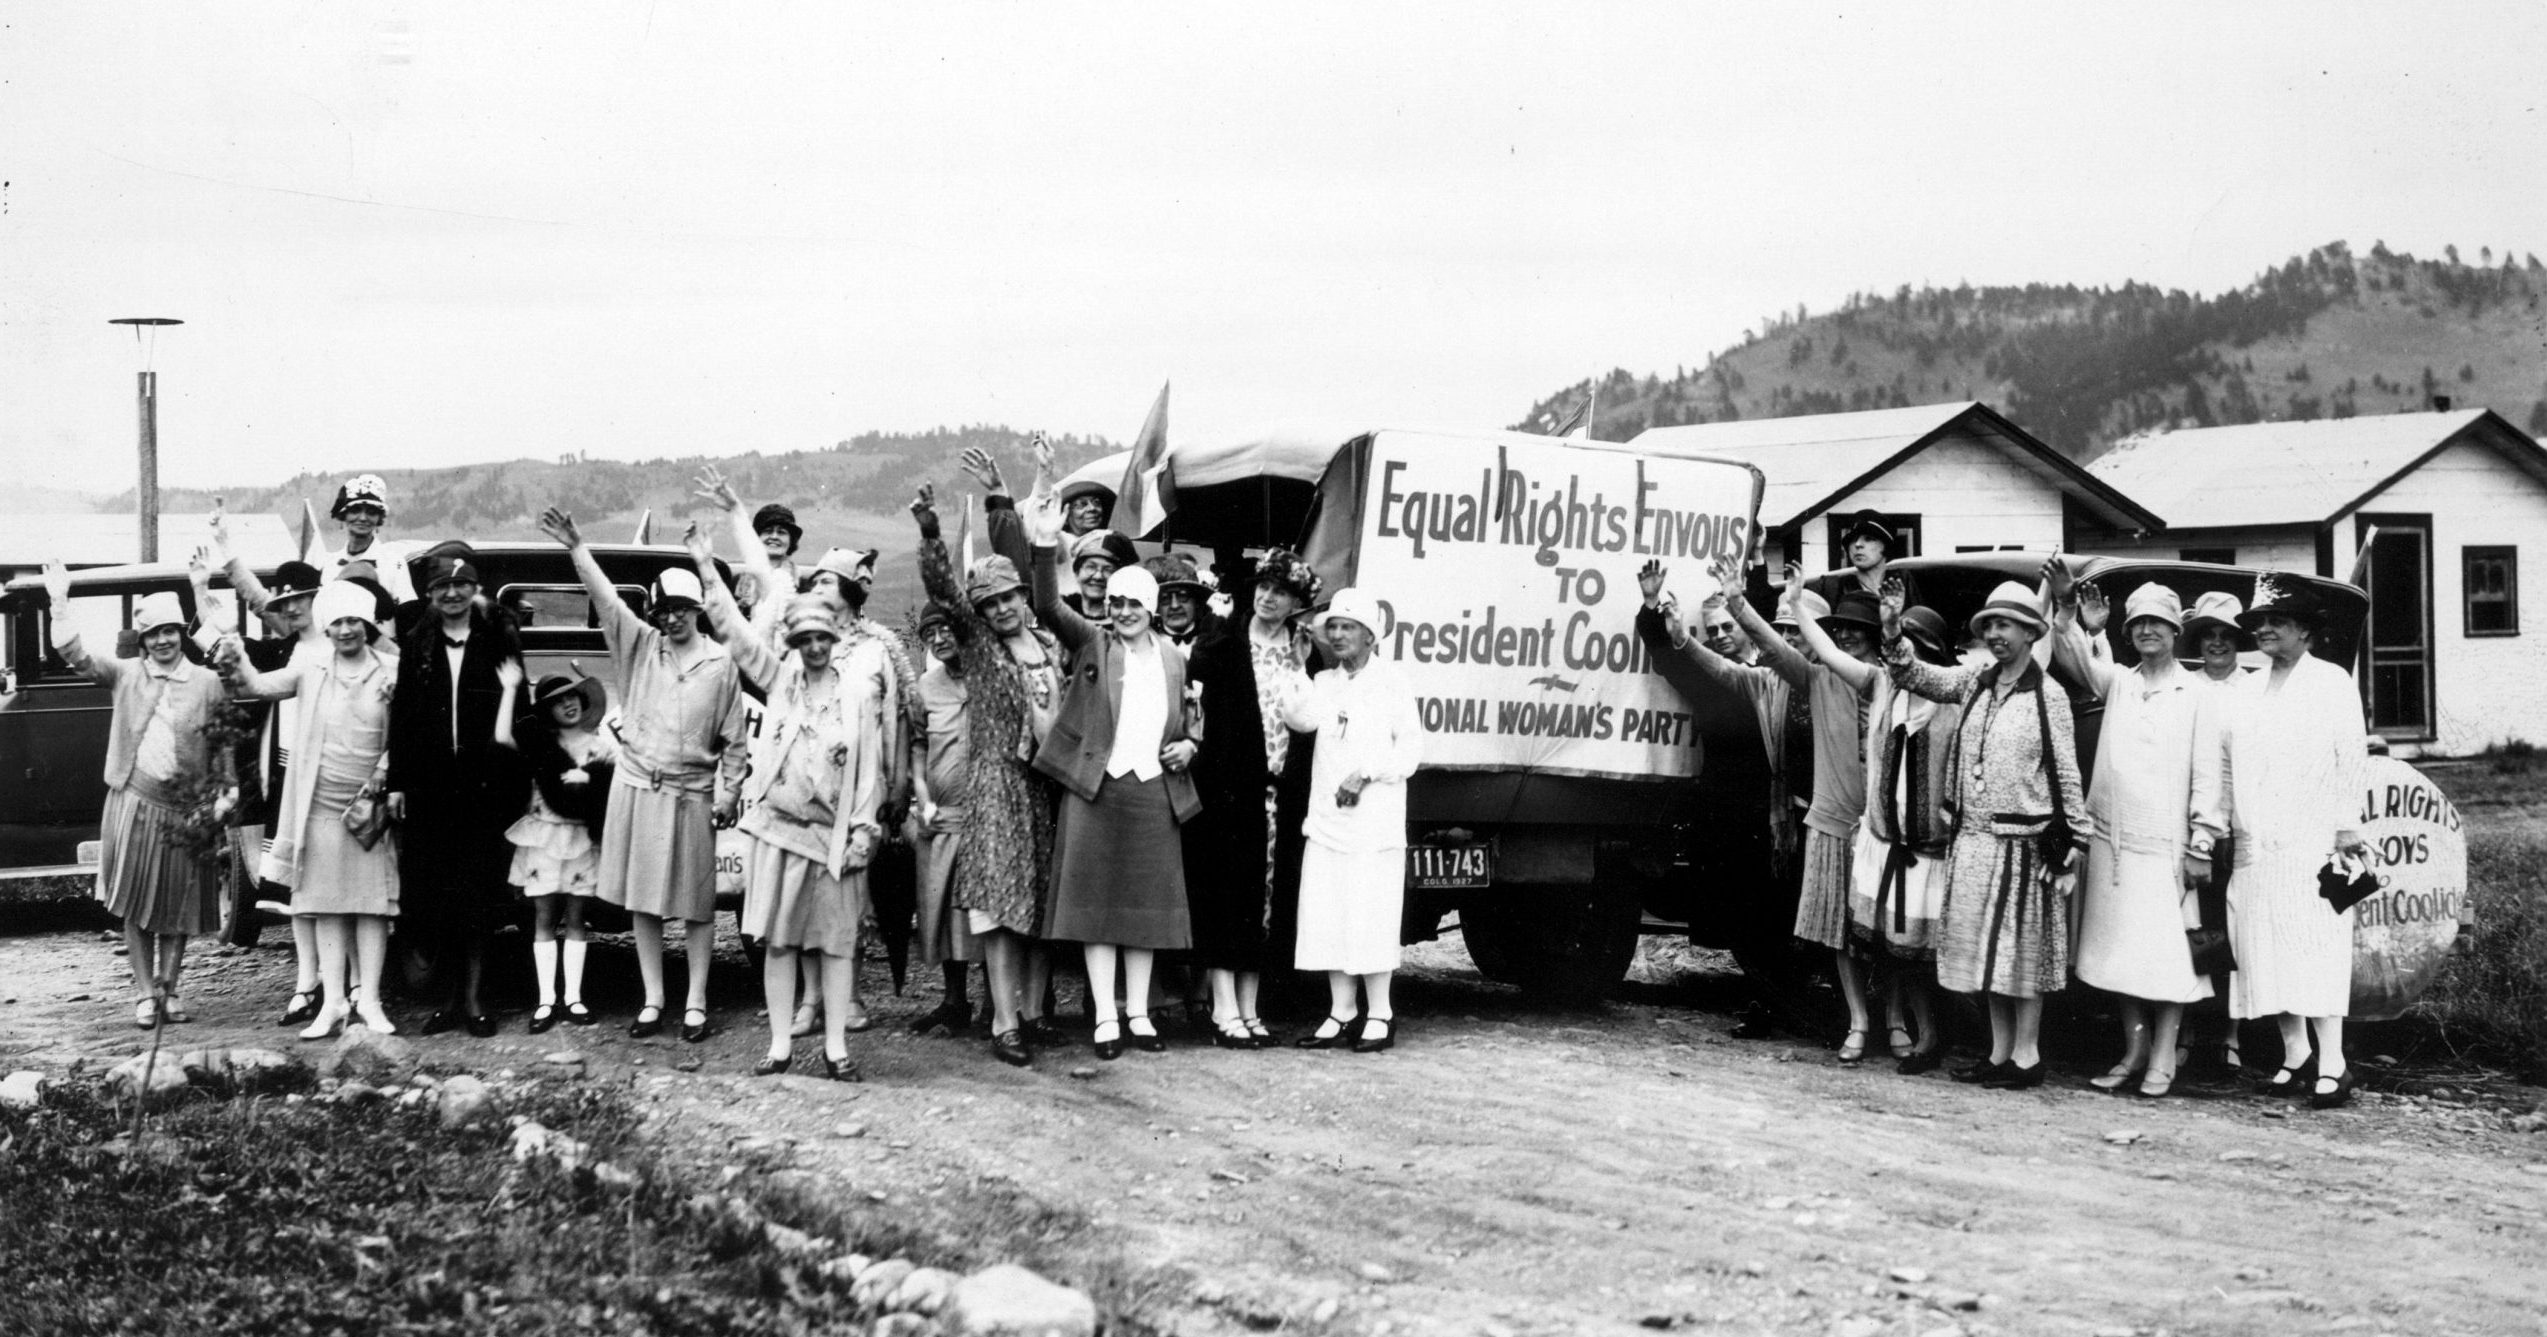 Equal Rights Envoys of the National Woman's PartyNational Woman's Party